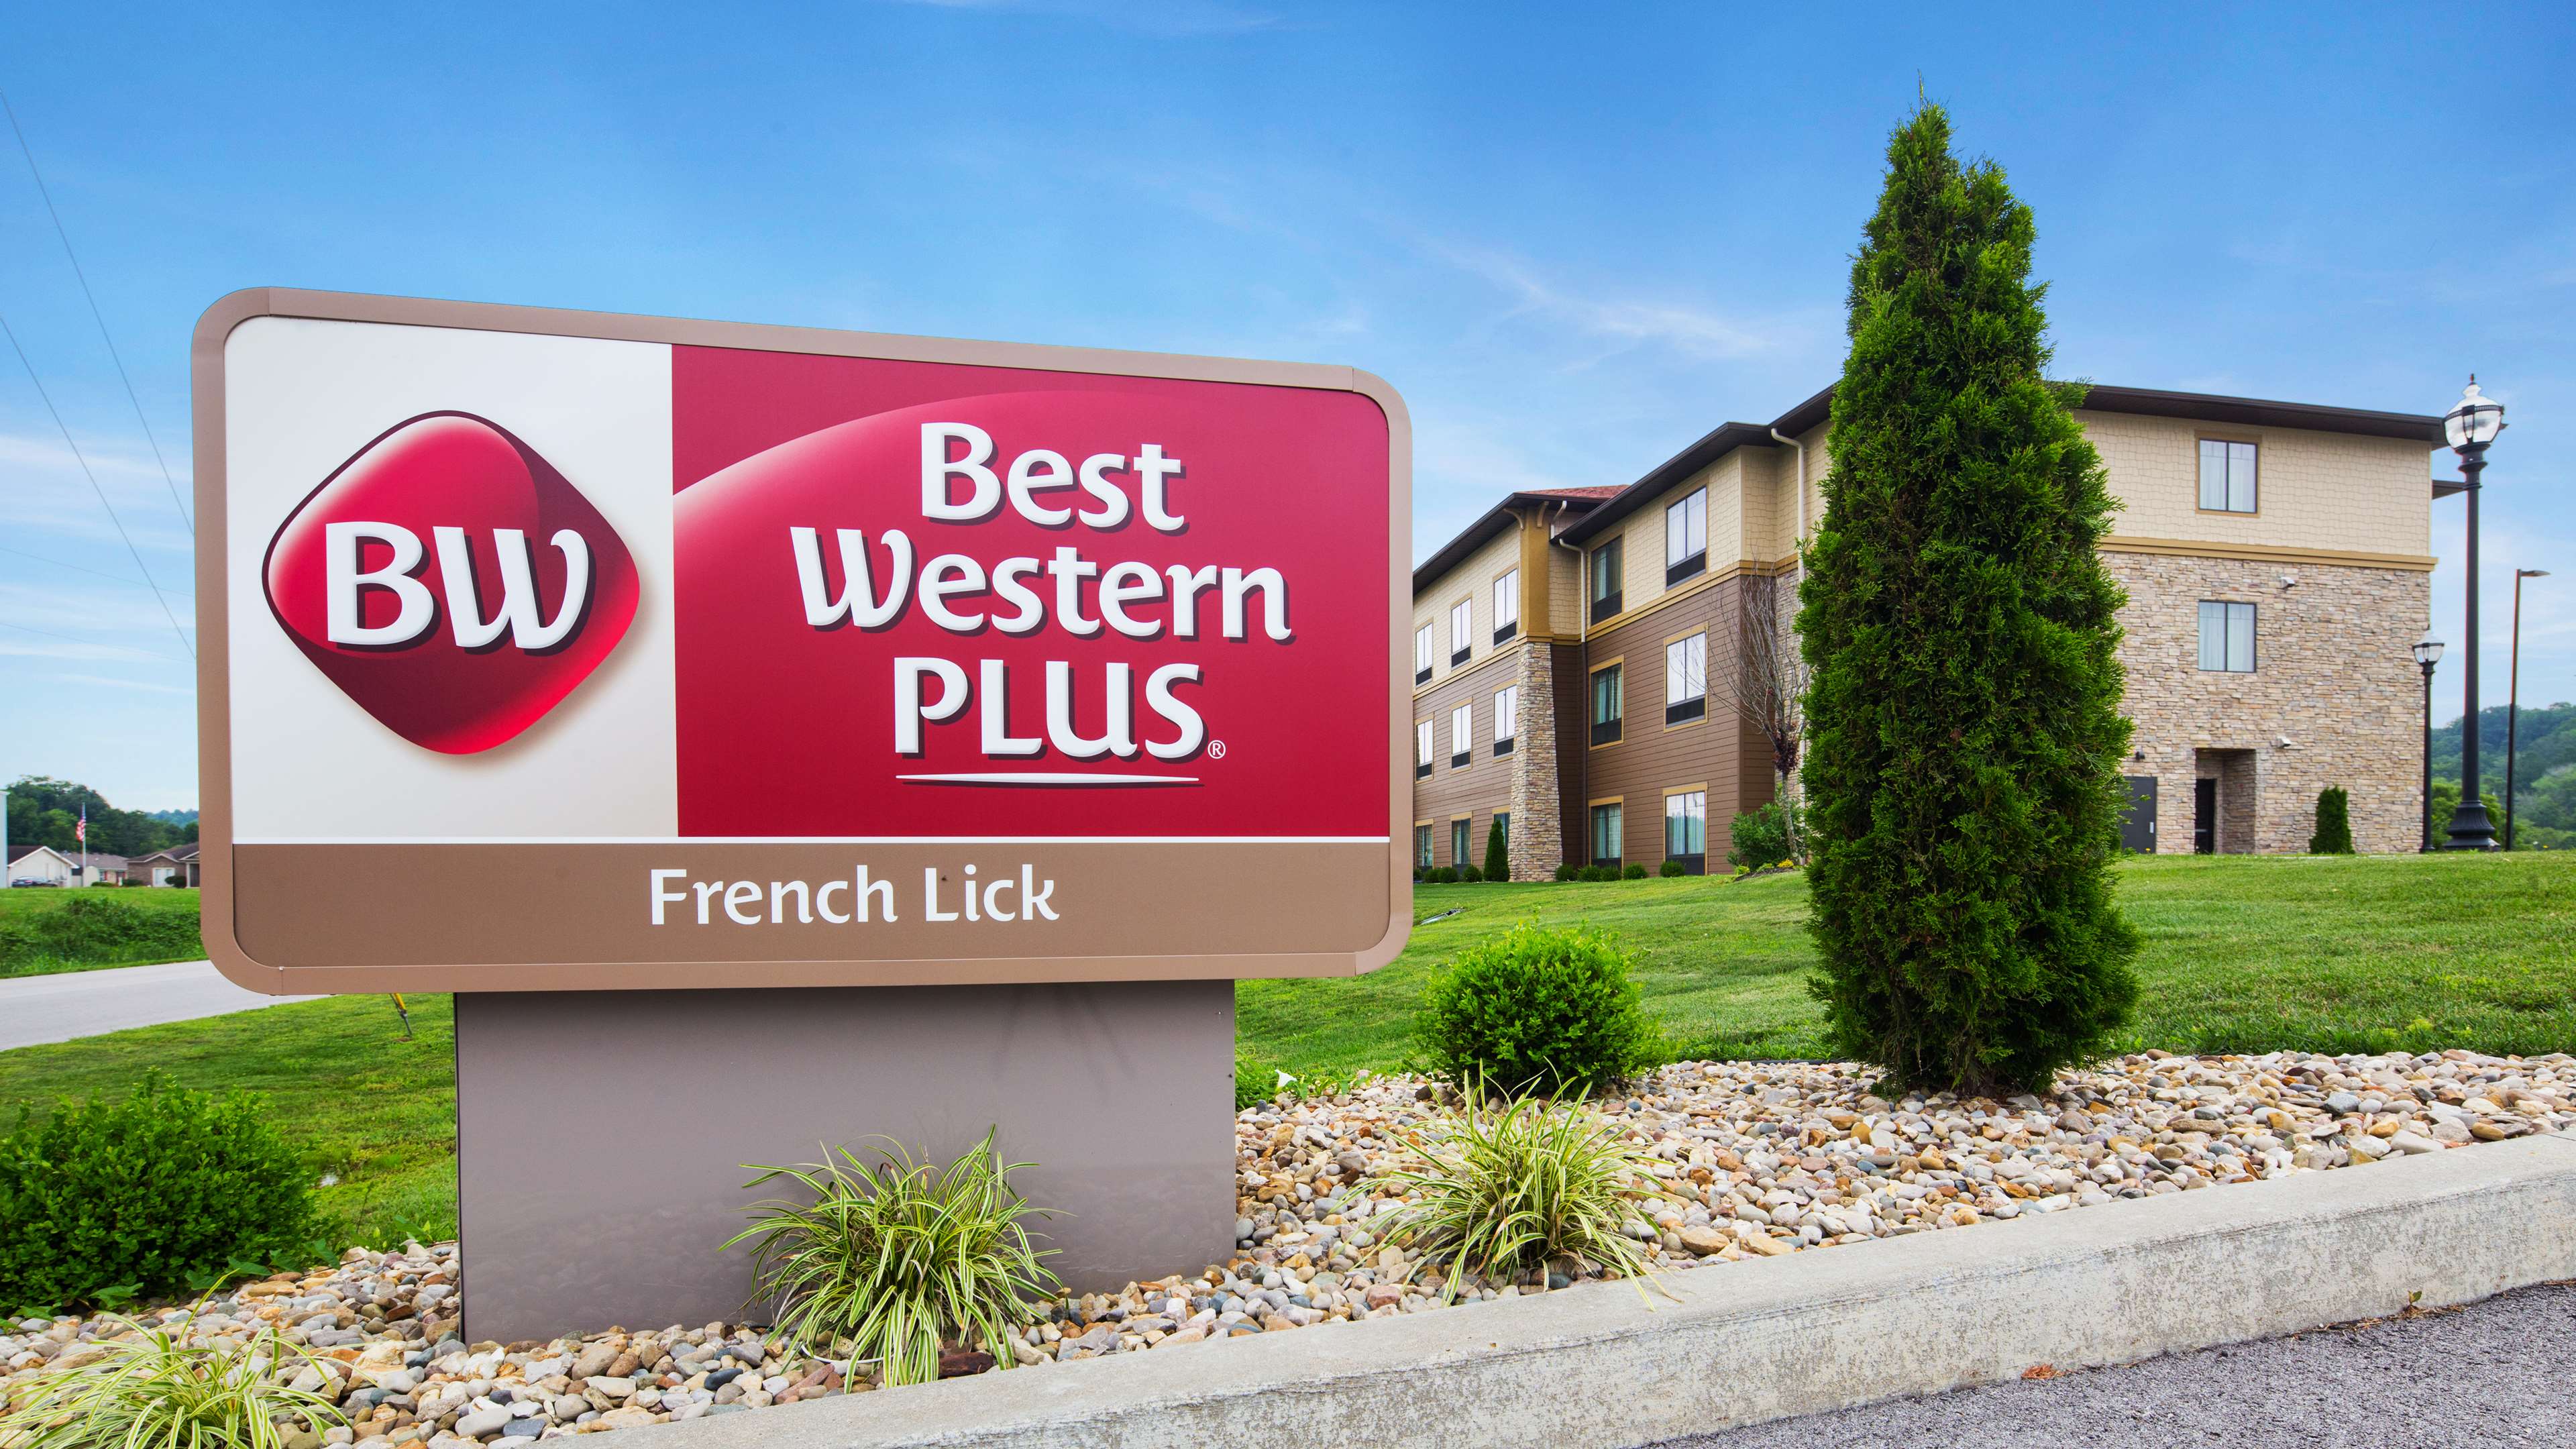 Photos & Pictures of Best Western Plus French Lick. 